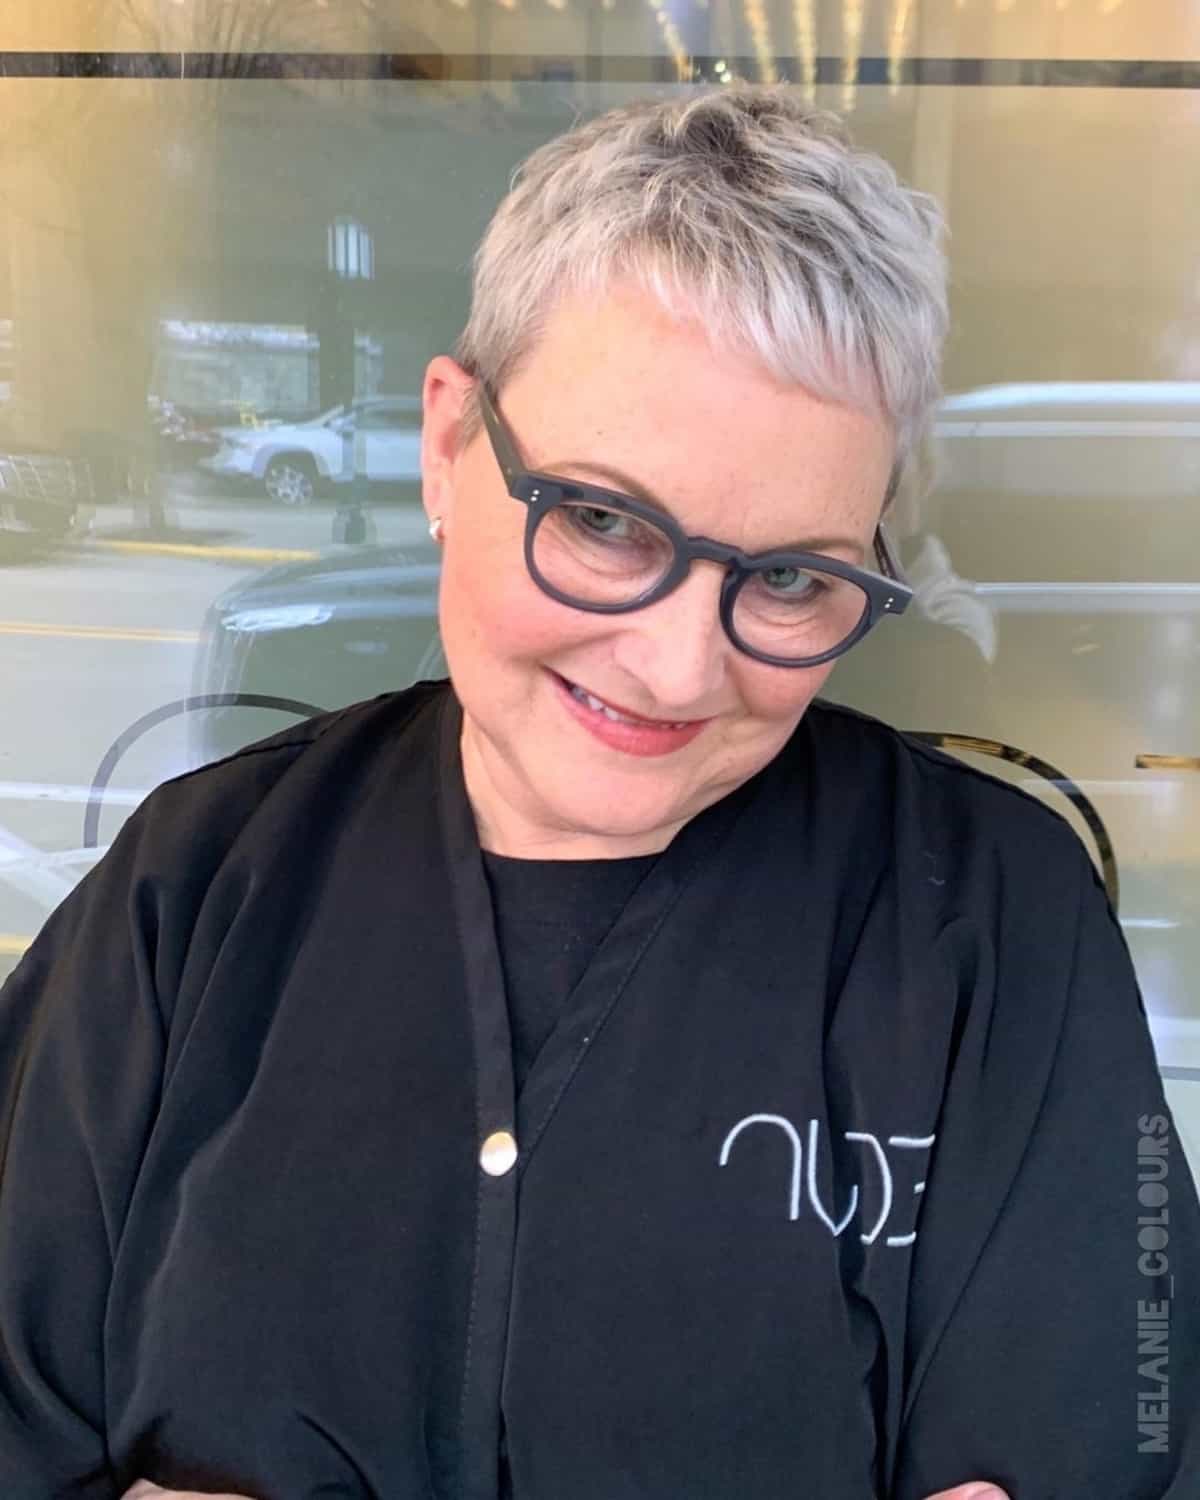 Short Pixie Cut for Older Women with Glasses